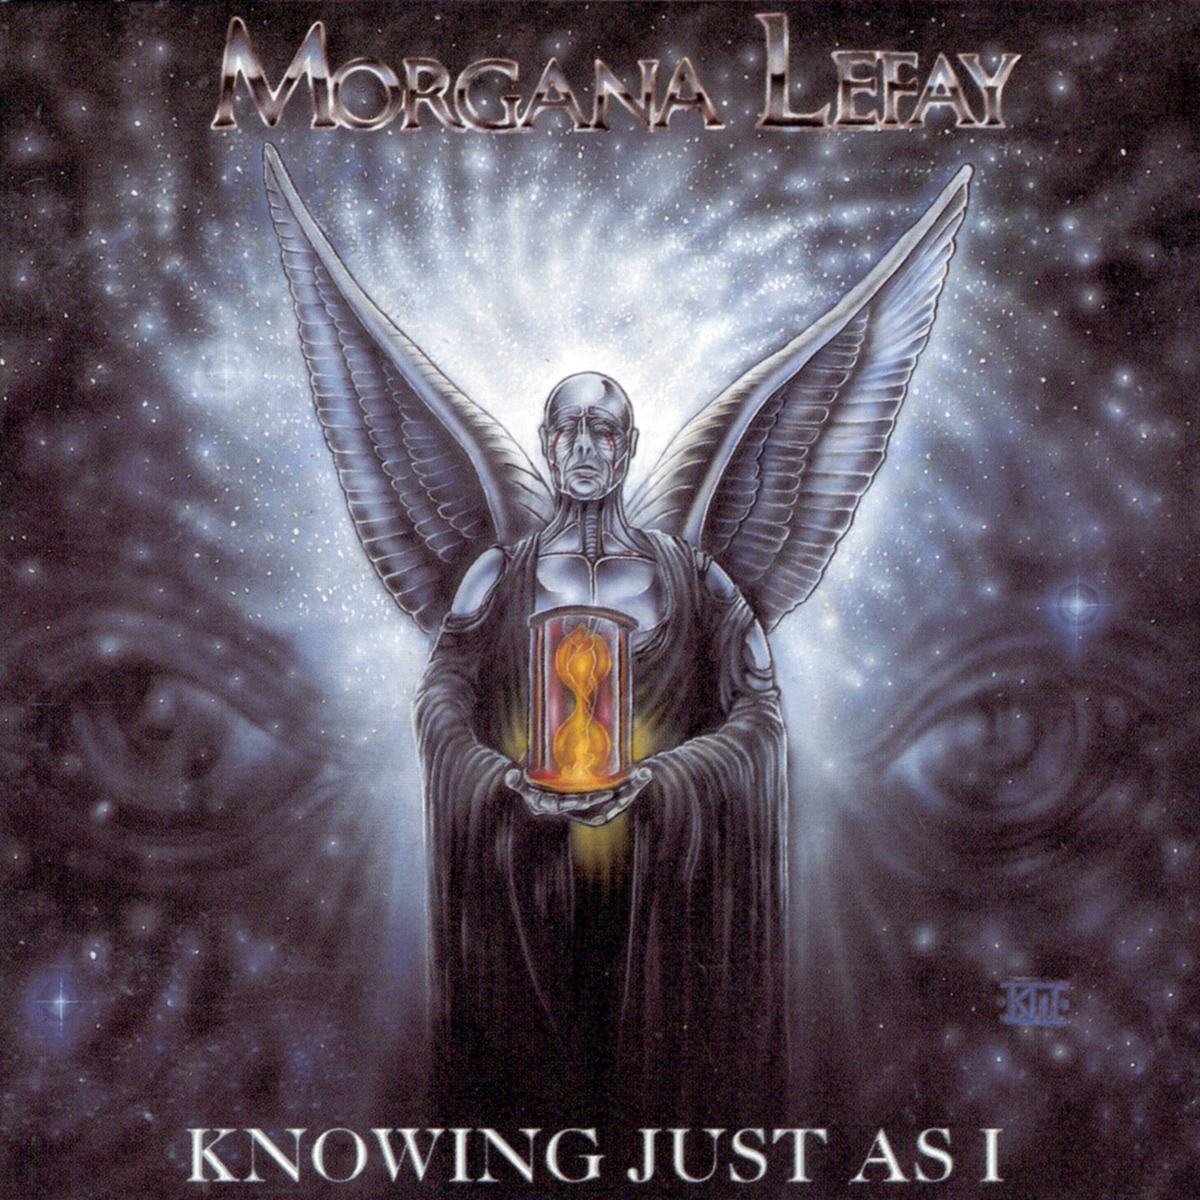 MORGANA LEFAY - Knowing Just as I cover 